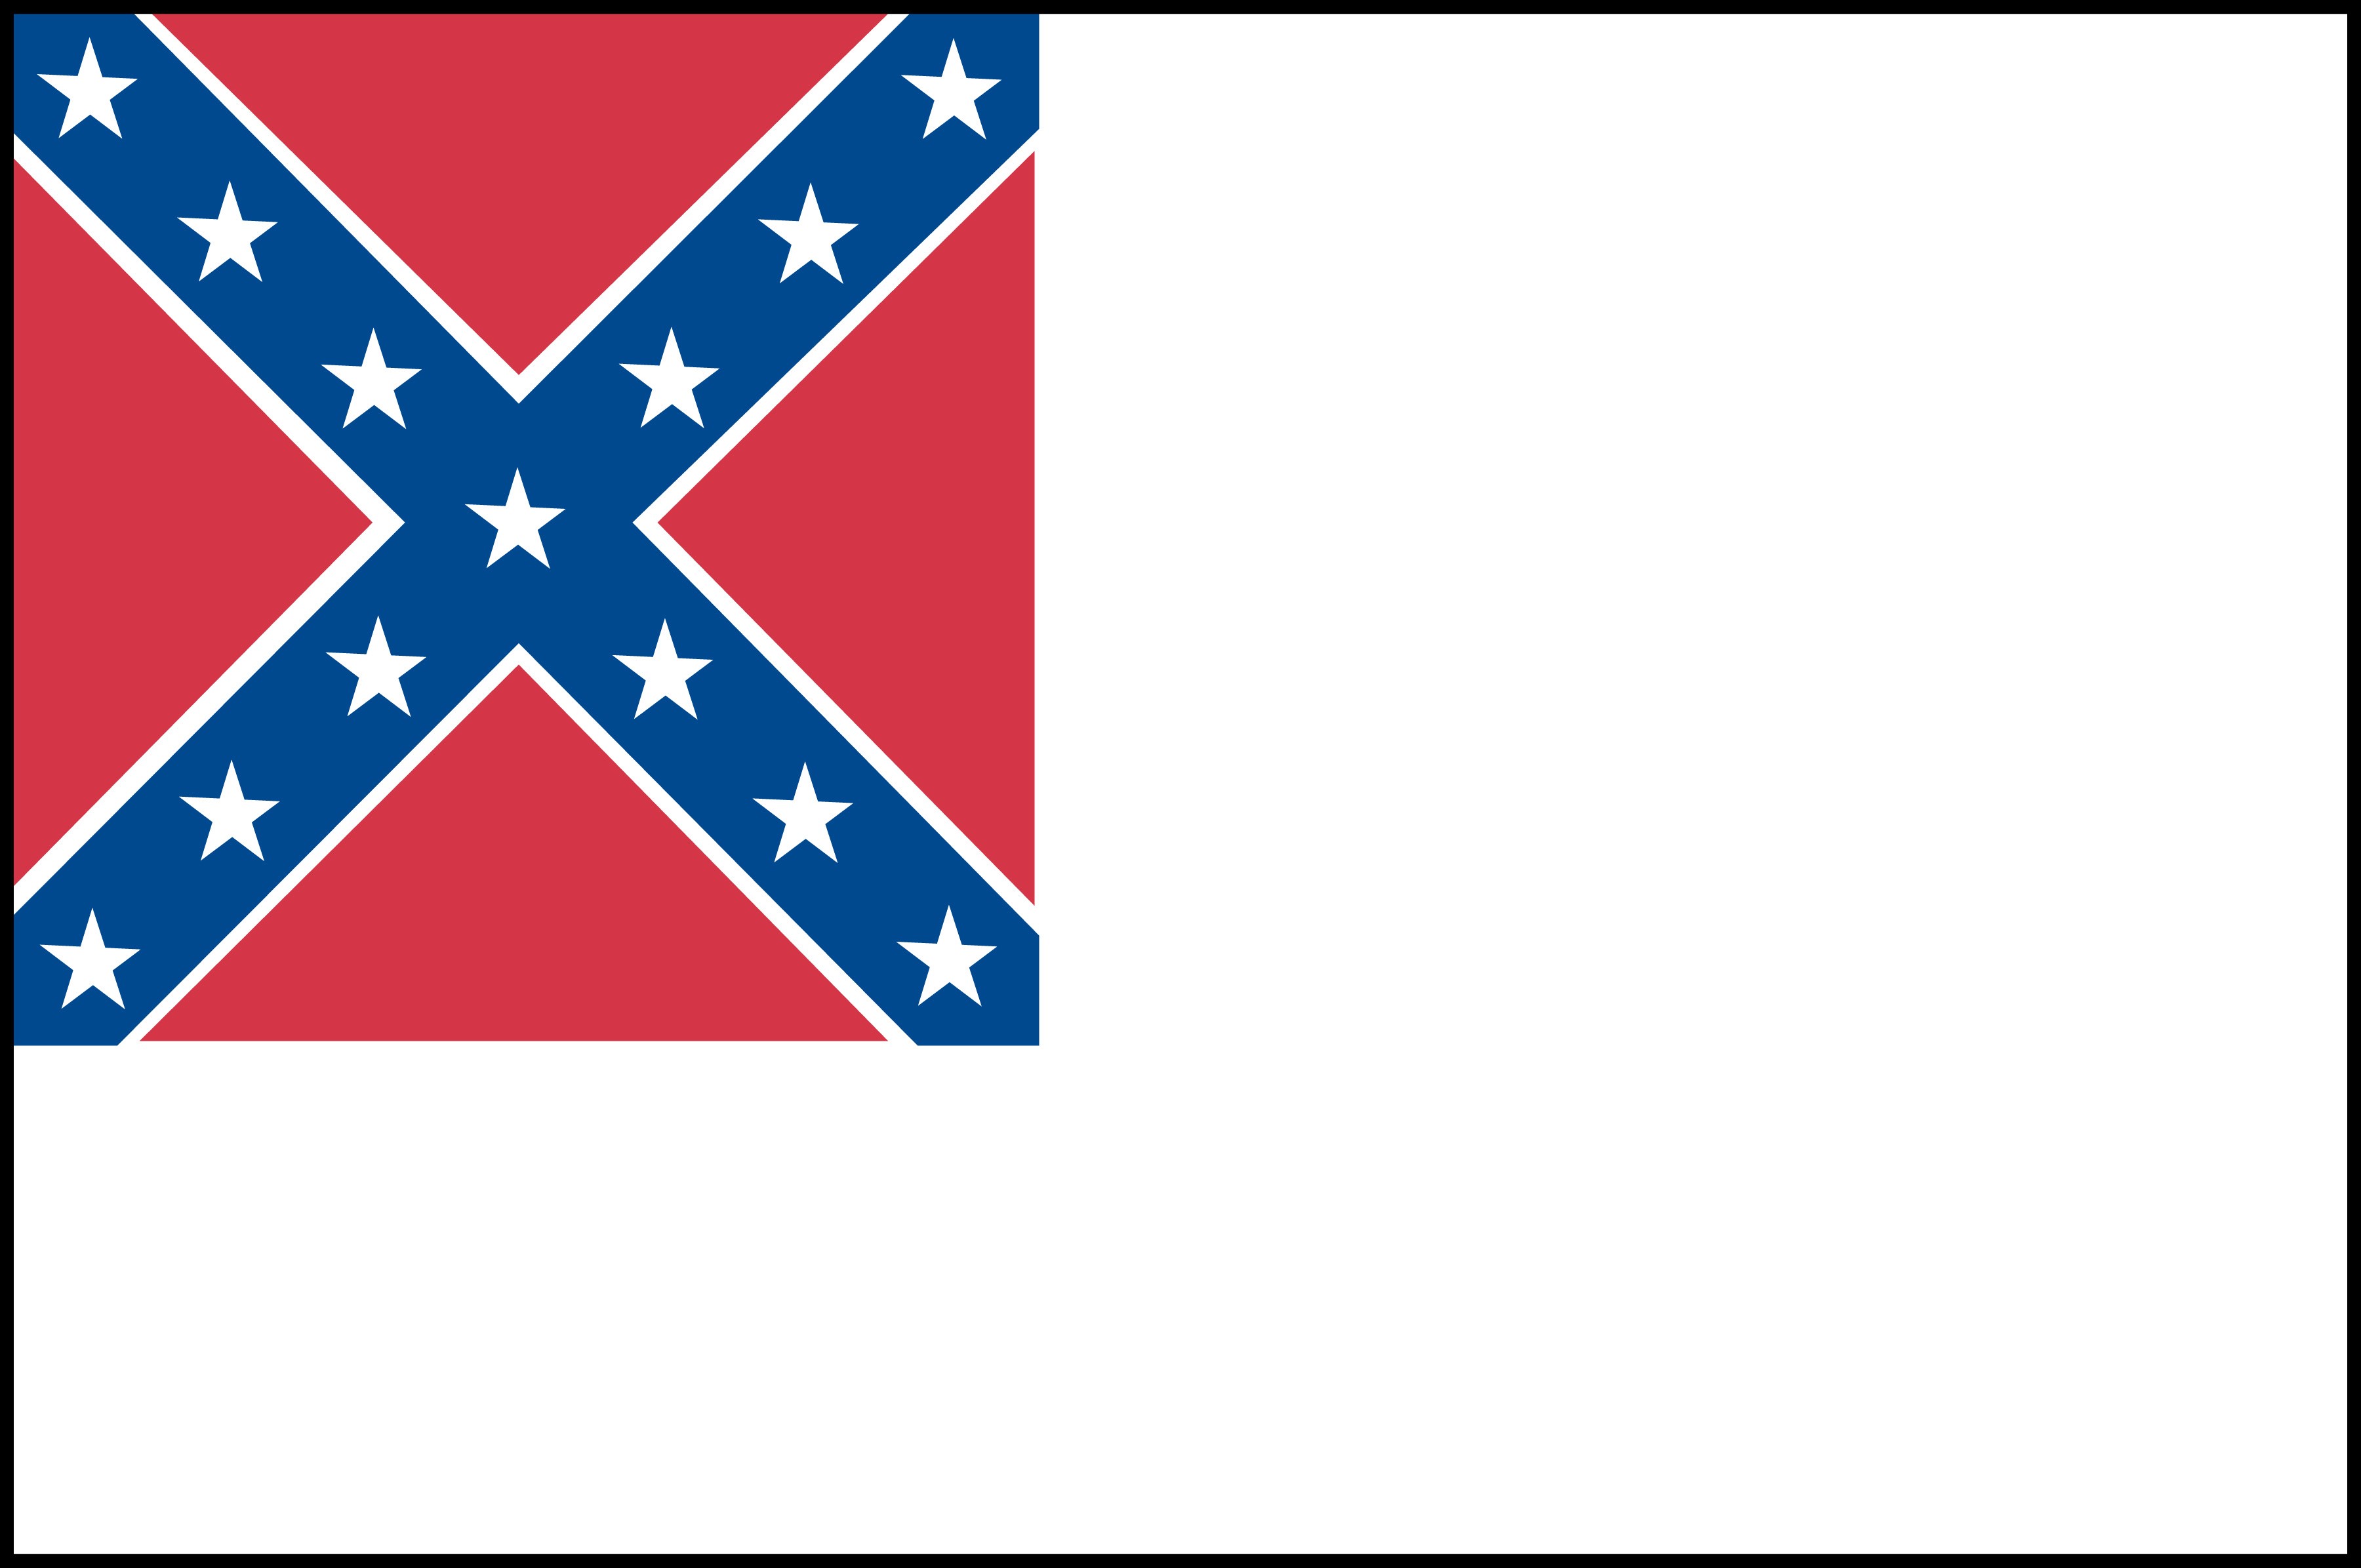 Second National Flag